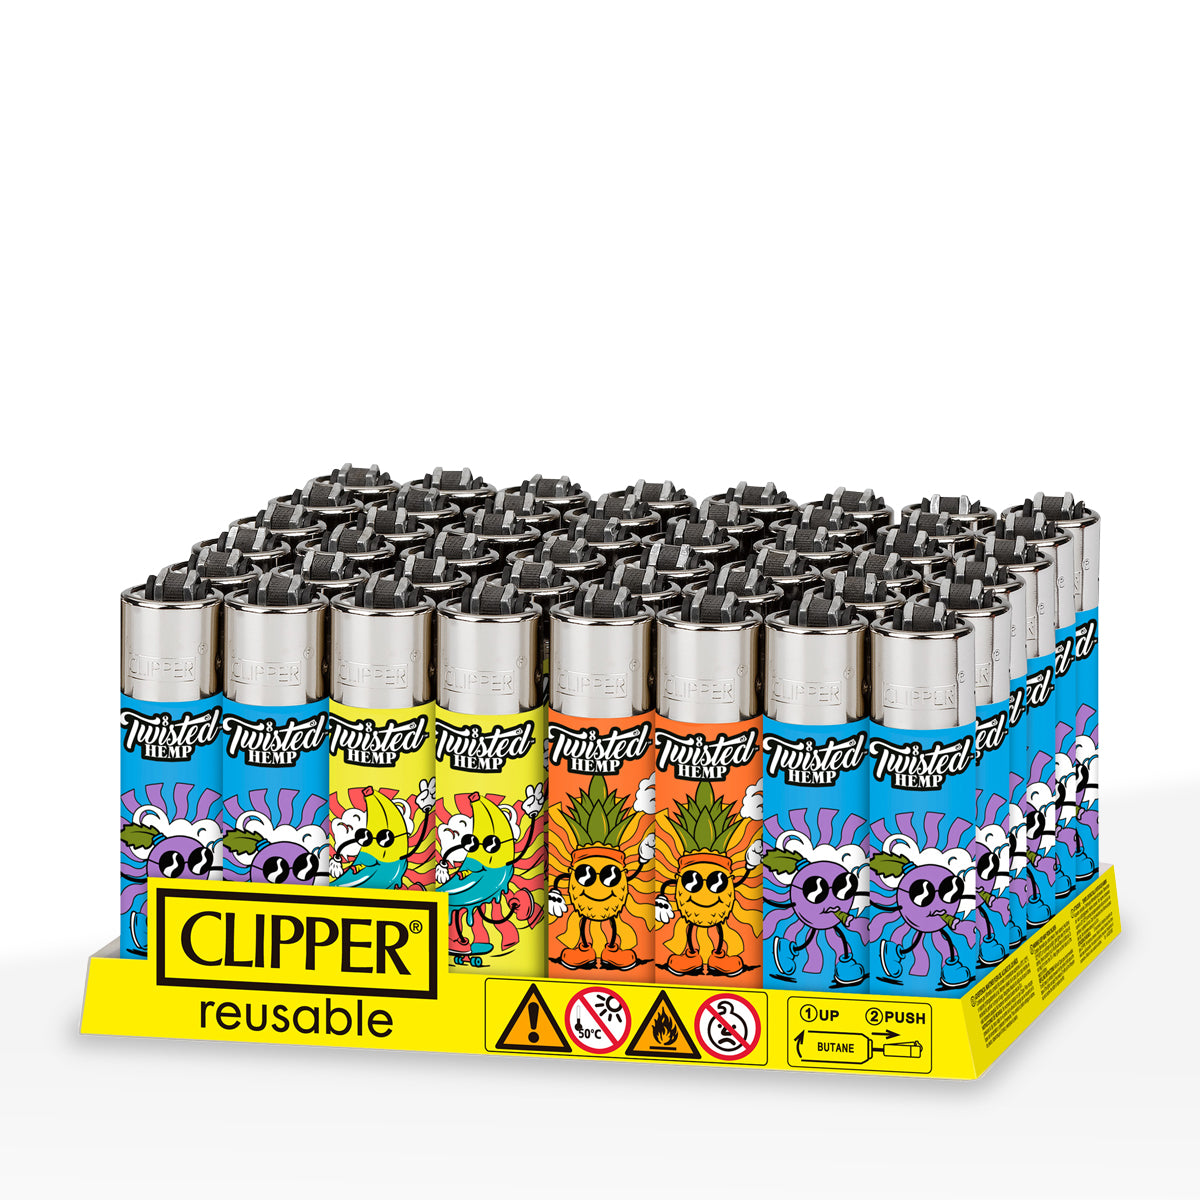 Clipper® | Twisted Hemp 'Retail Display' Lighters | 48 Count - Various Styles